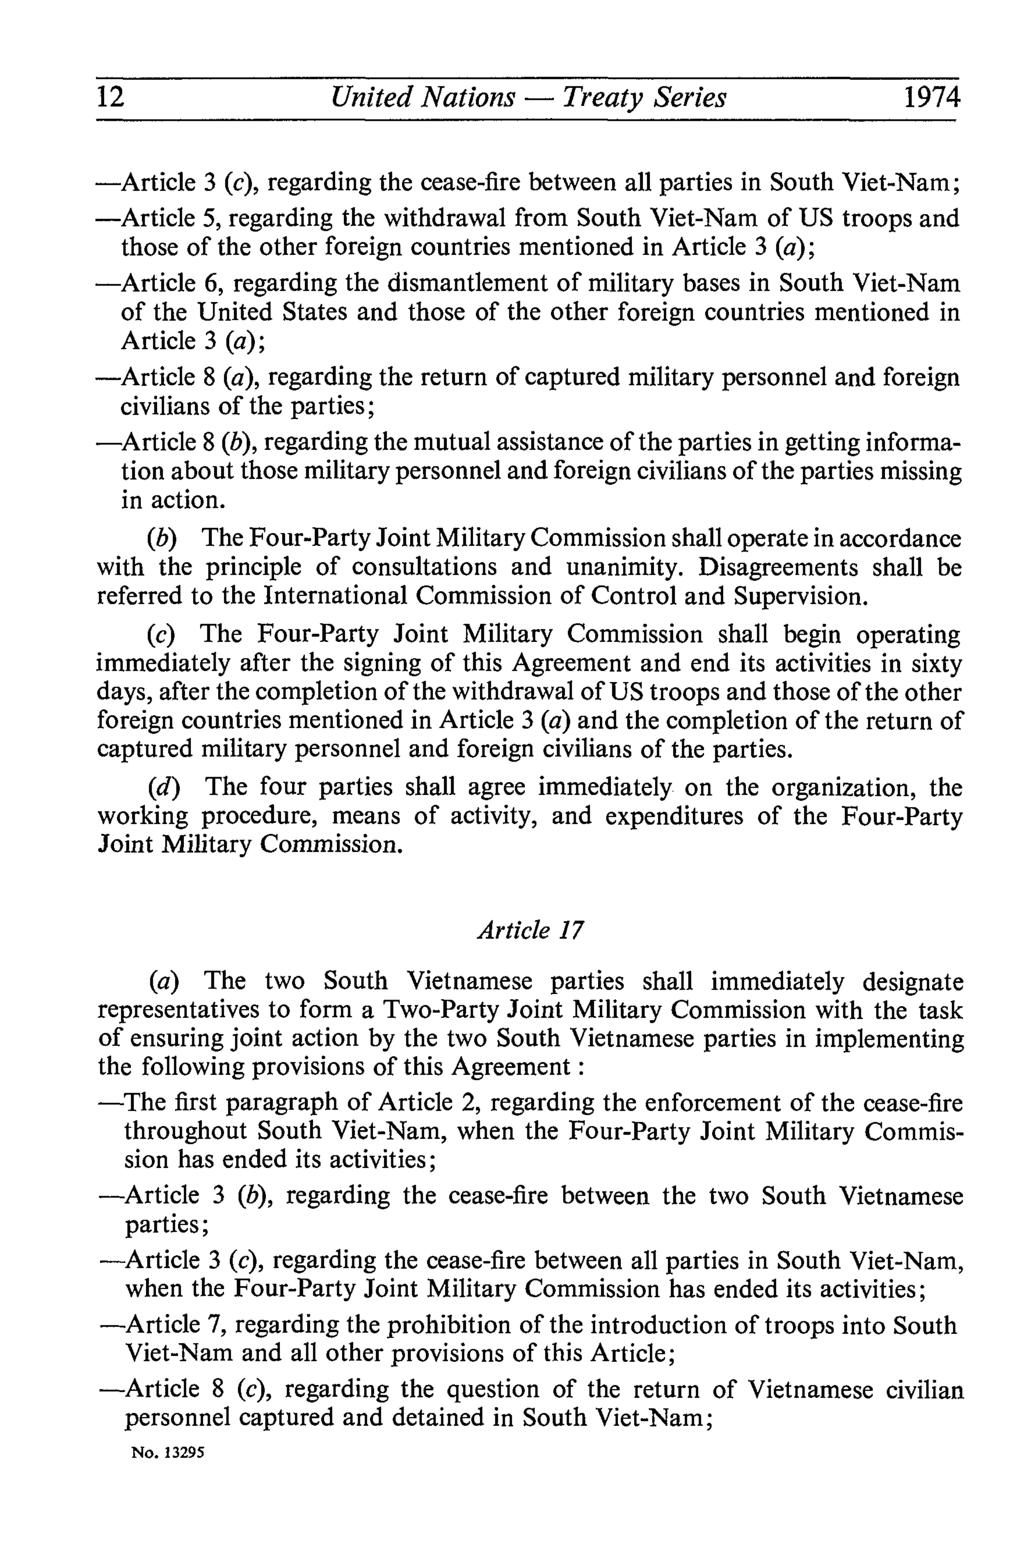 12 United Nations Treaty Series 1974 Article 3 (c), regarding the cease-fire between all parties in South Viet-Nara; Article 5, regarding the withdrawal from South Viet-Nam of US troops and those of